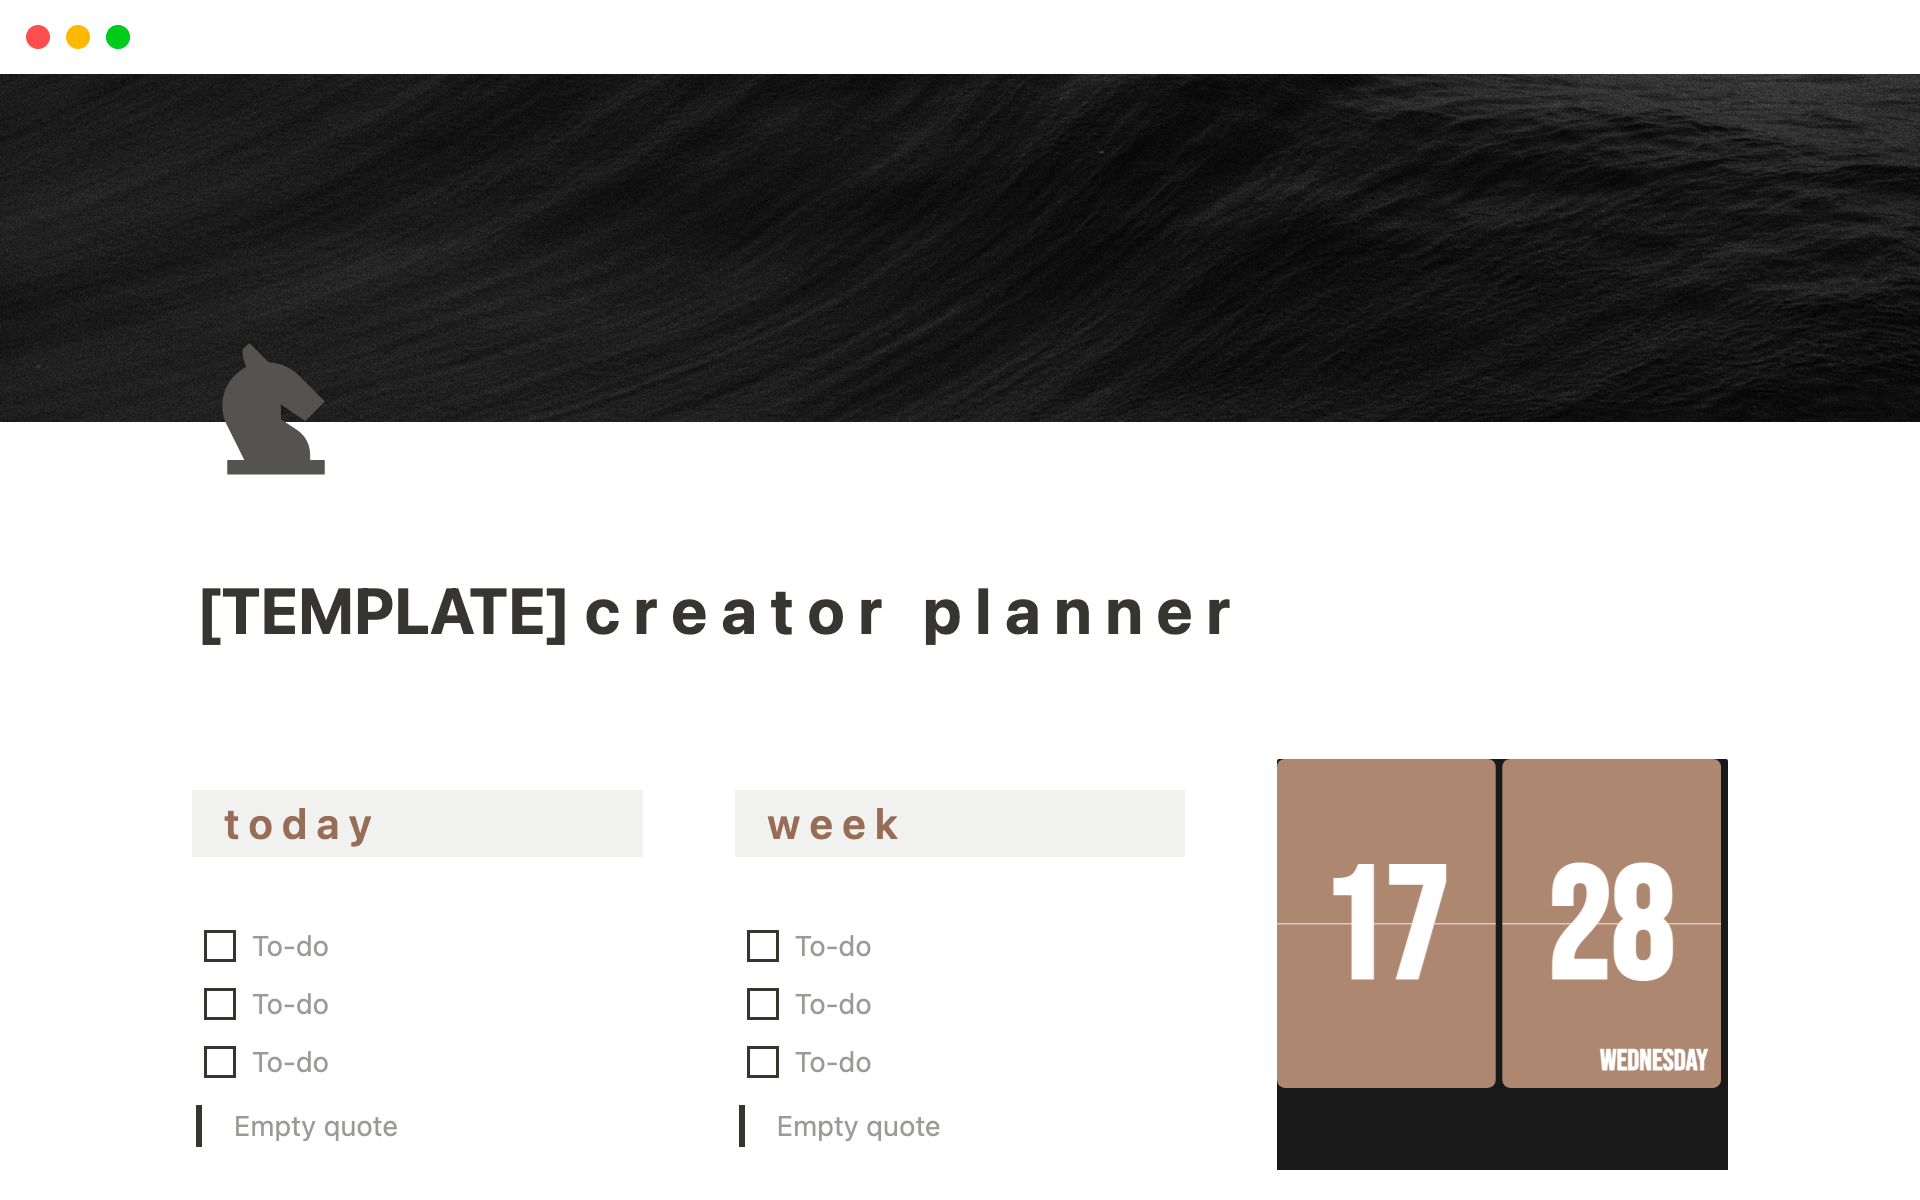 The Creator Planner offers sections for scheduling, brainstorming, to-do lists, journaling, and archiving, and can be used as a social media planner or digital bullet journal.